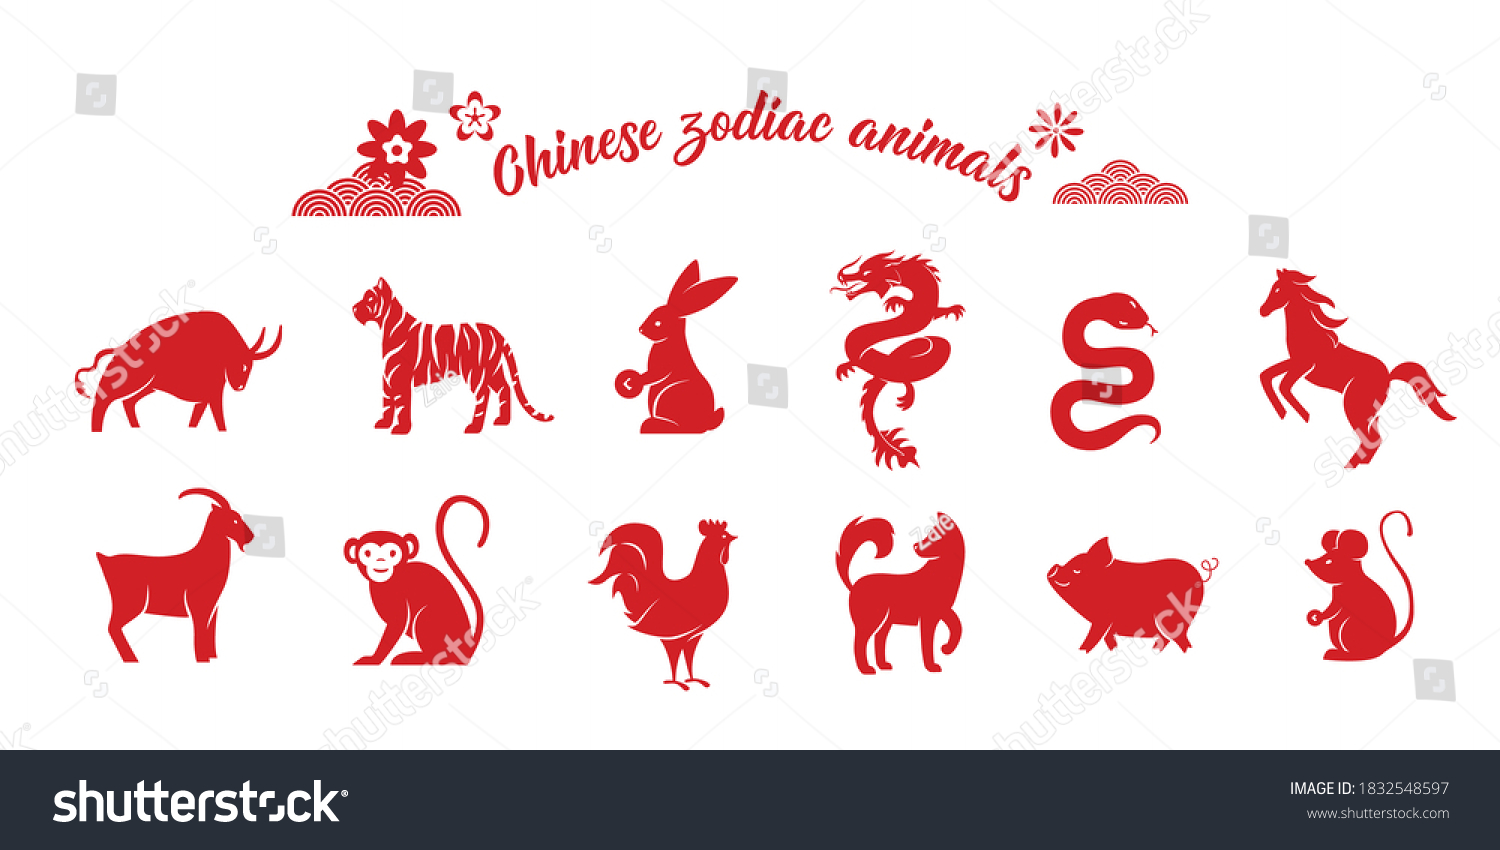 SVG of Chinese zodiac animal collection. Twelve asian new year red character logos set isolated on white background. Vector illustration of astrology calendar horoscope symbols. svg